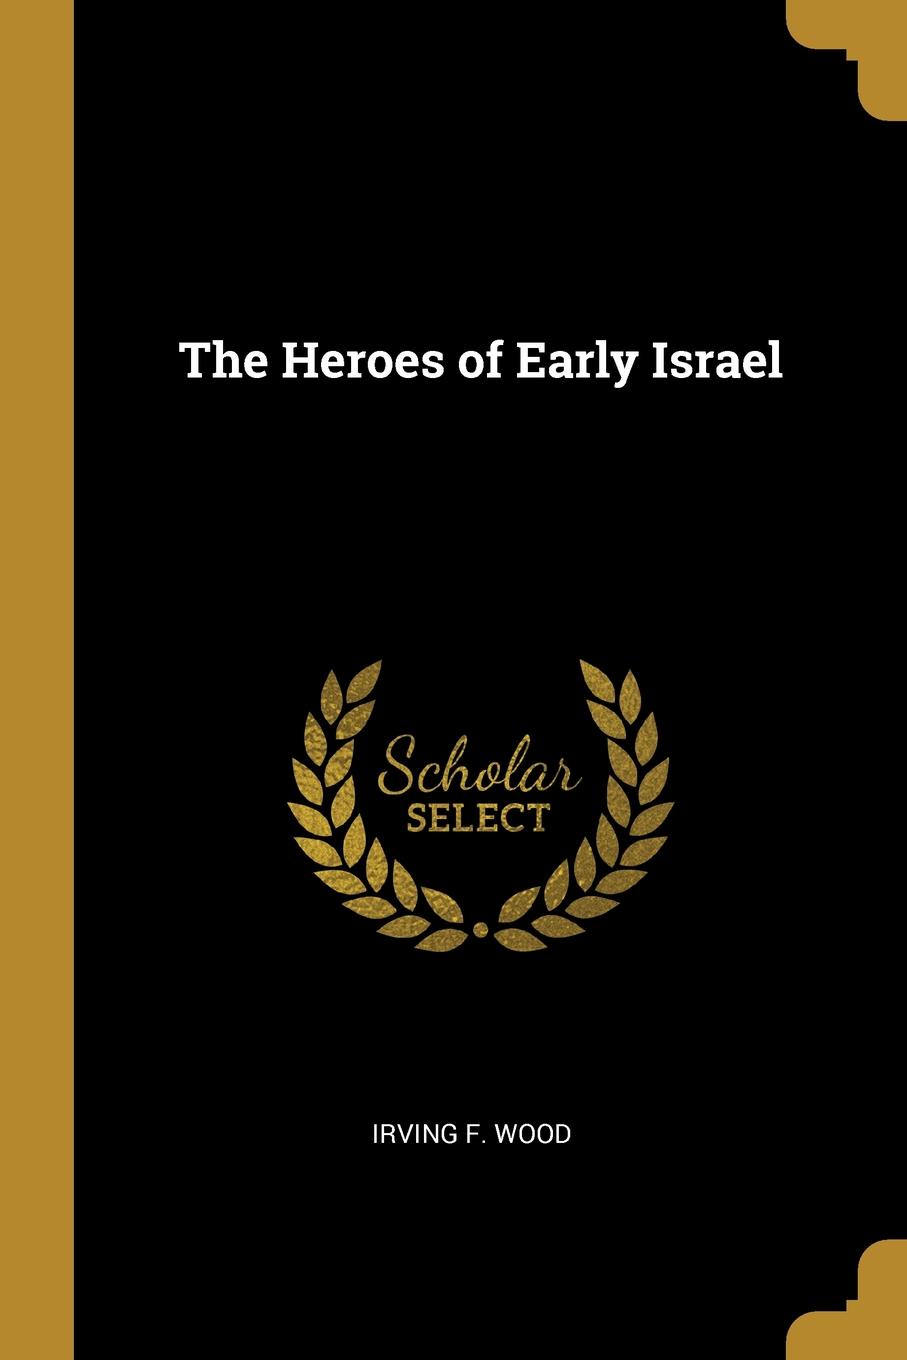 The Heroes of Early Israel